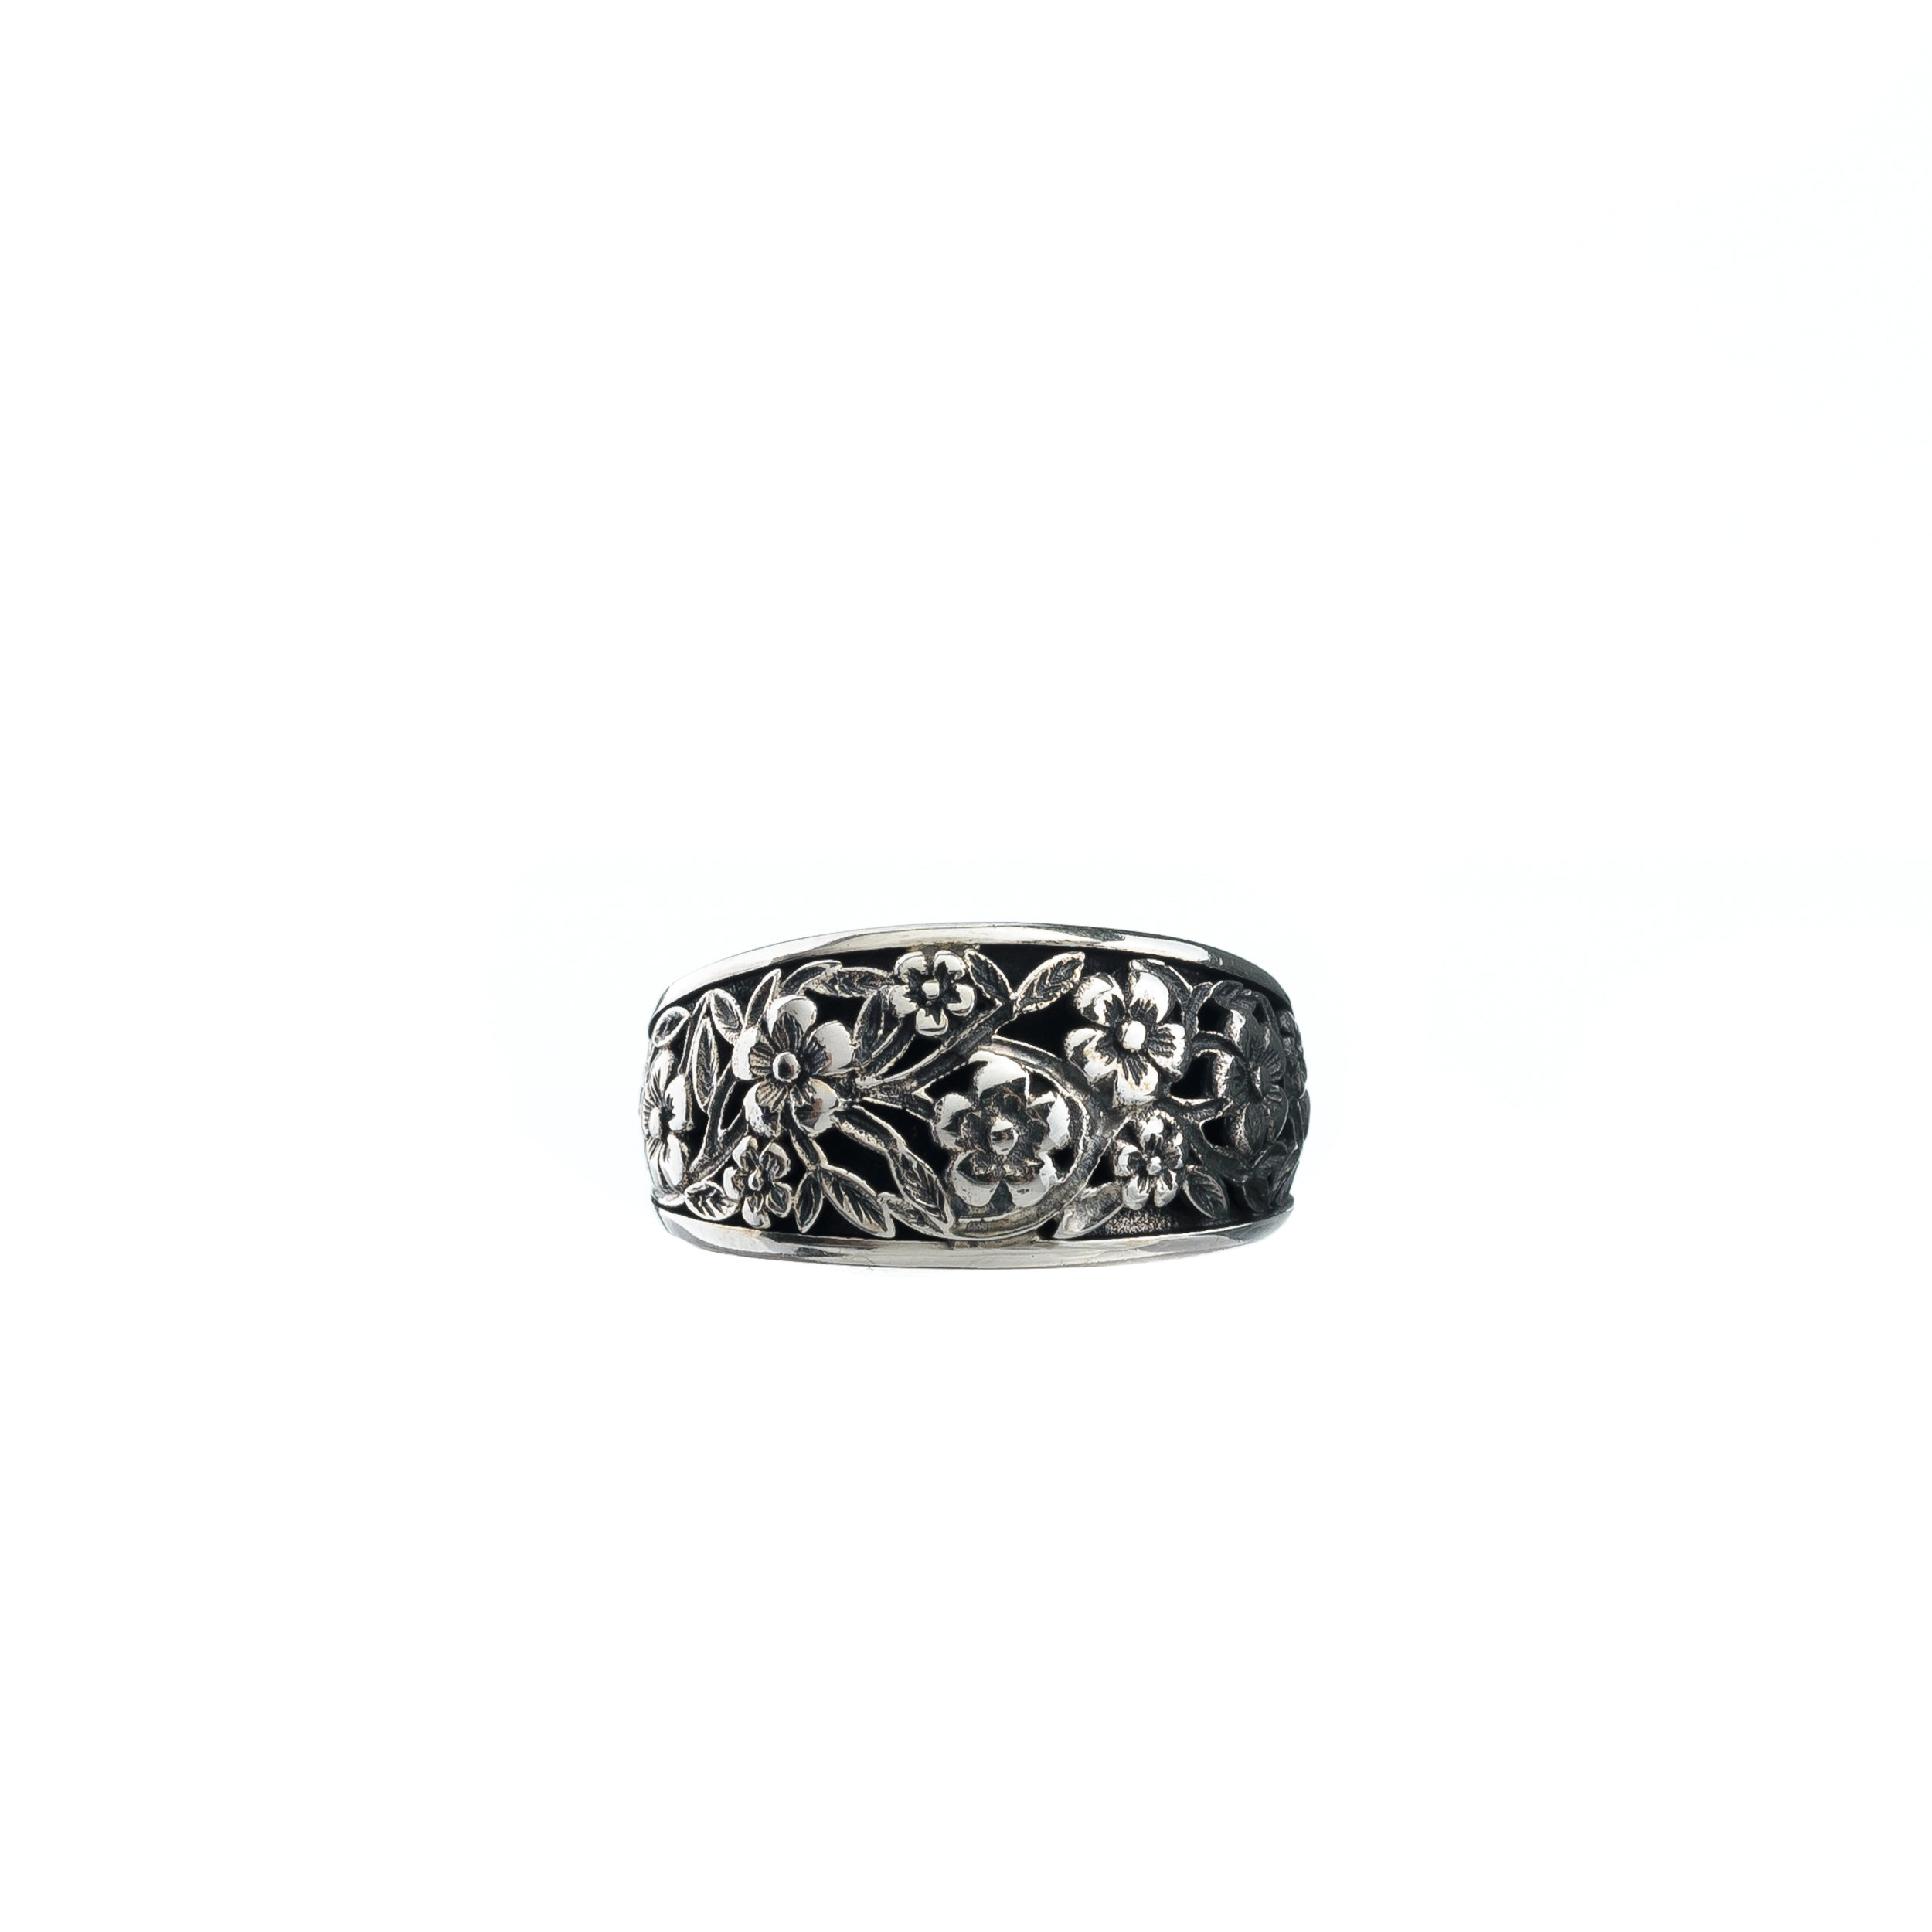 Harmony ring in Sterling Silver